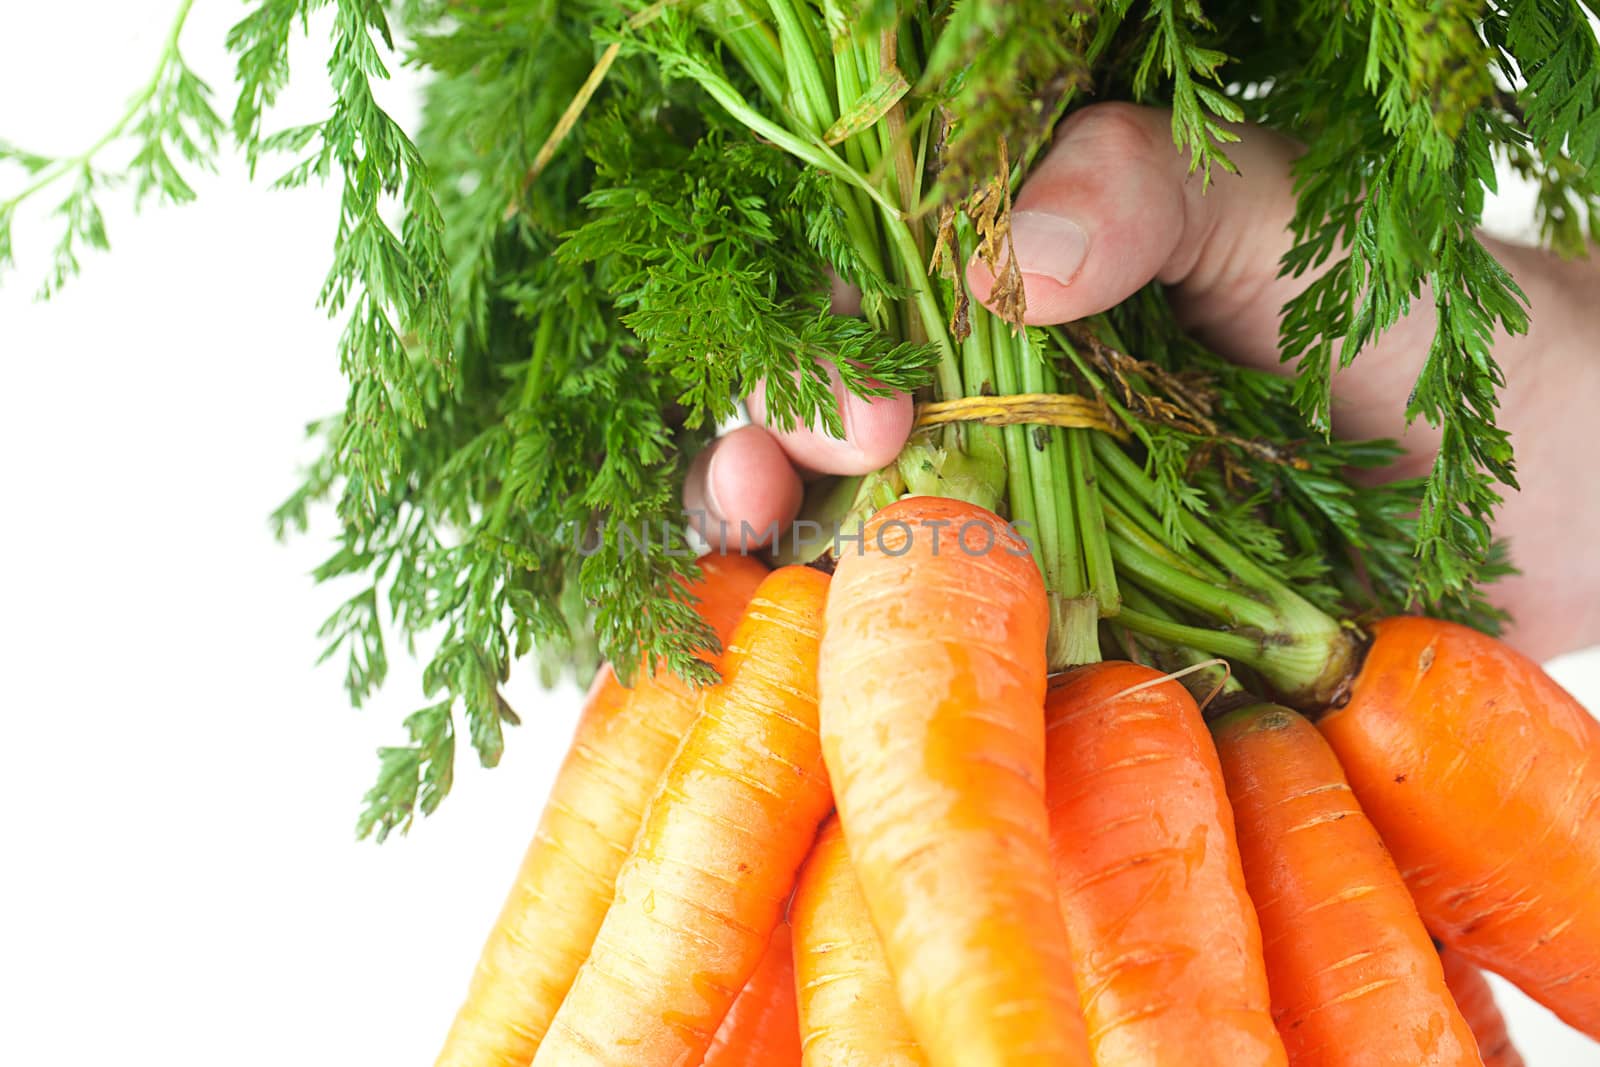 bunch of carrots with green leaves in a man hand isolated on whi by jannyjus